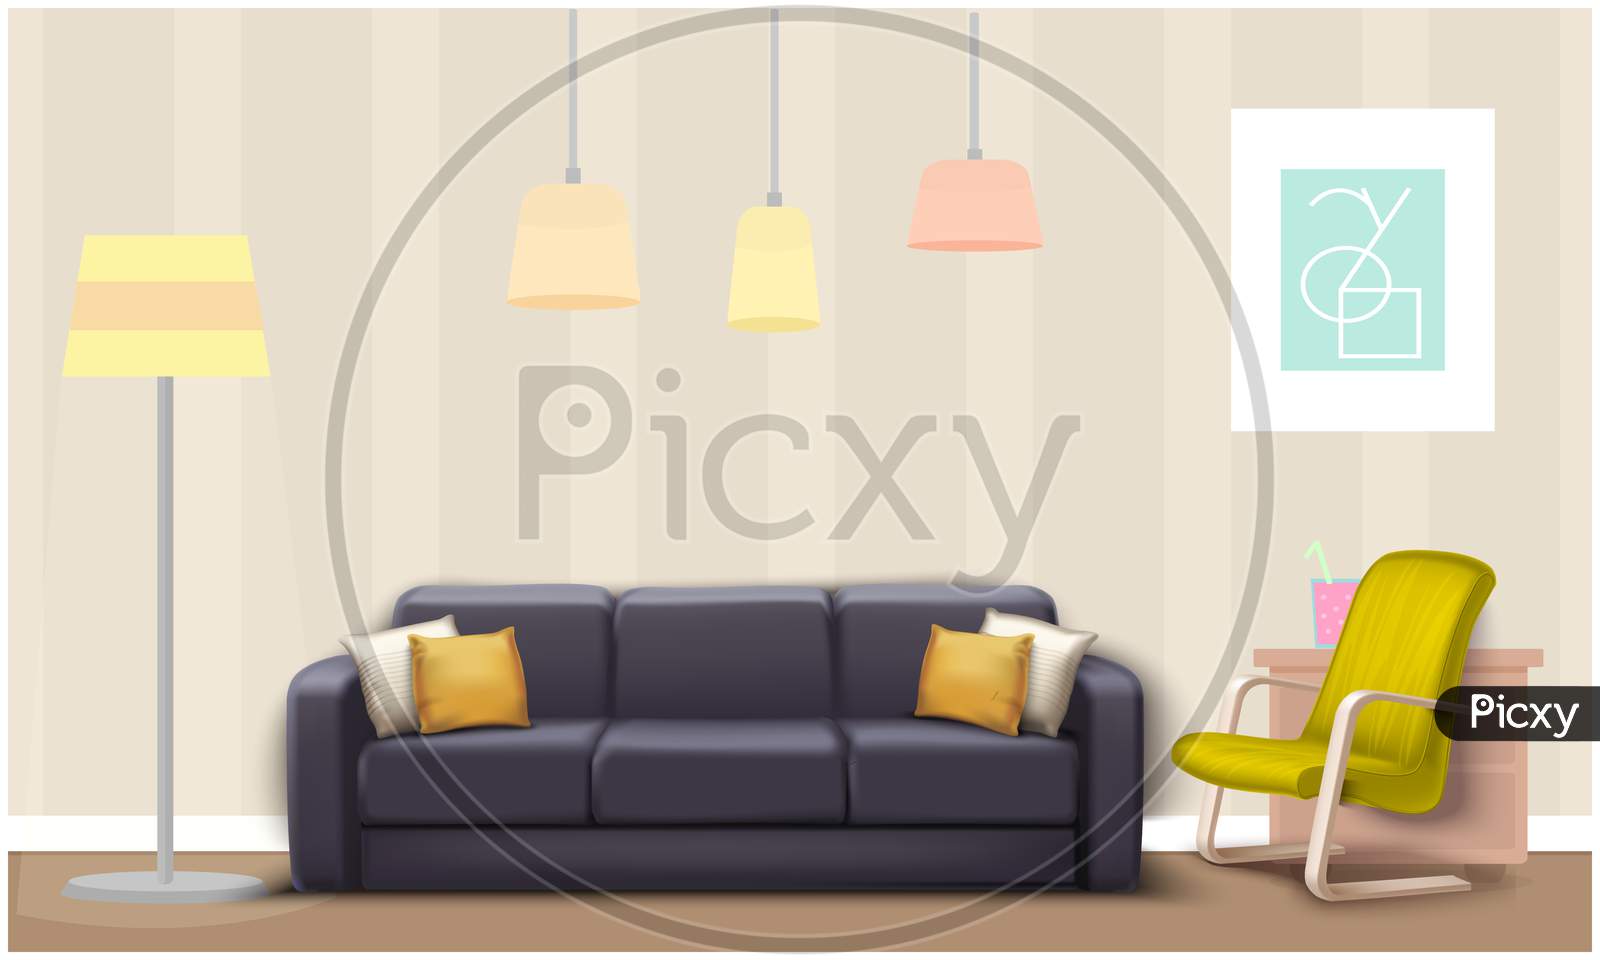 Mock Up Illustration Of Gray Couch And Yellow Chair In A Lounge